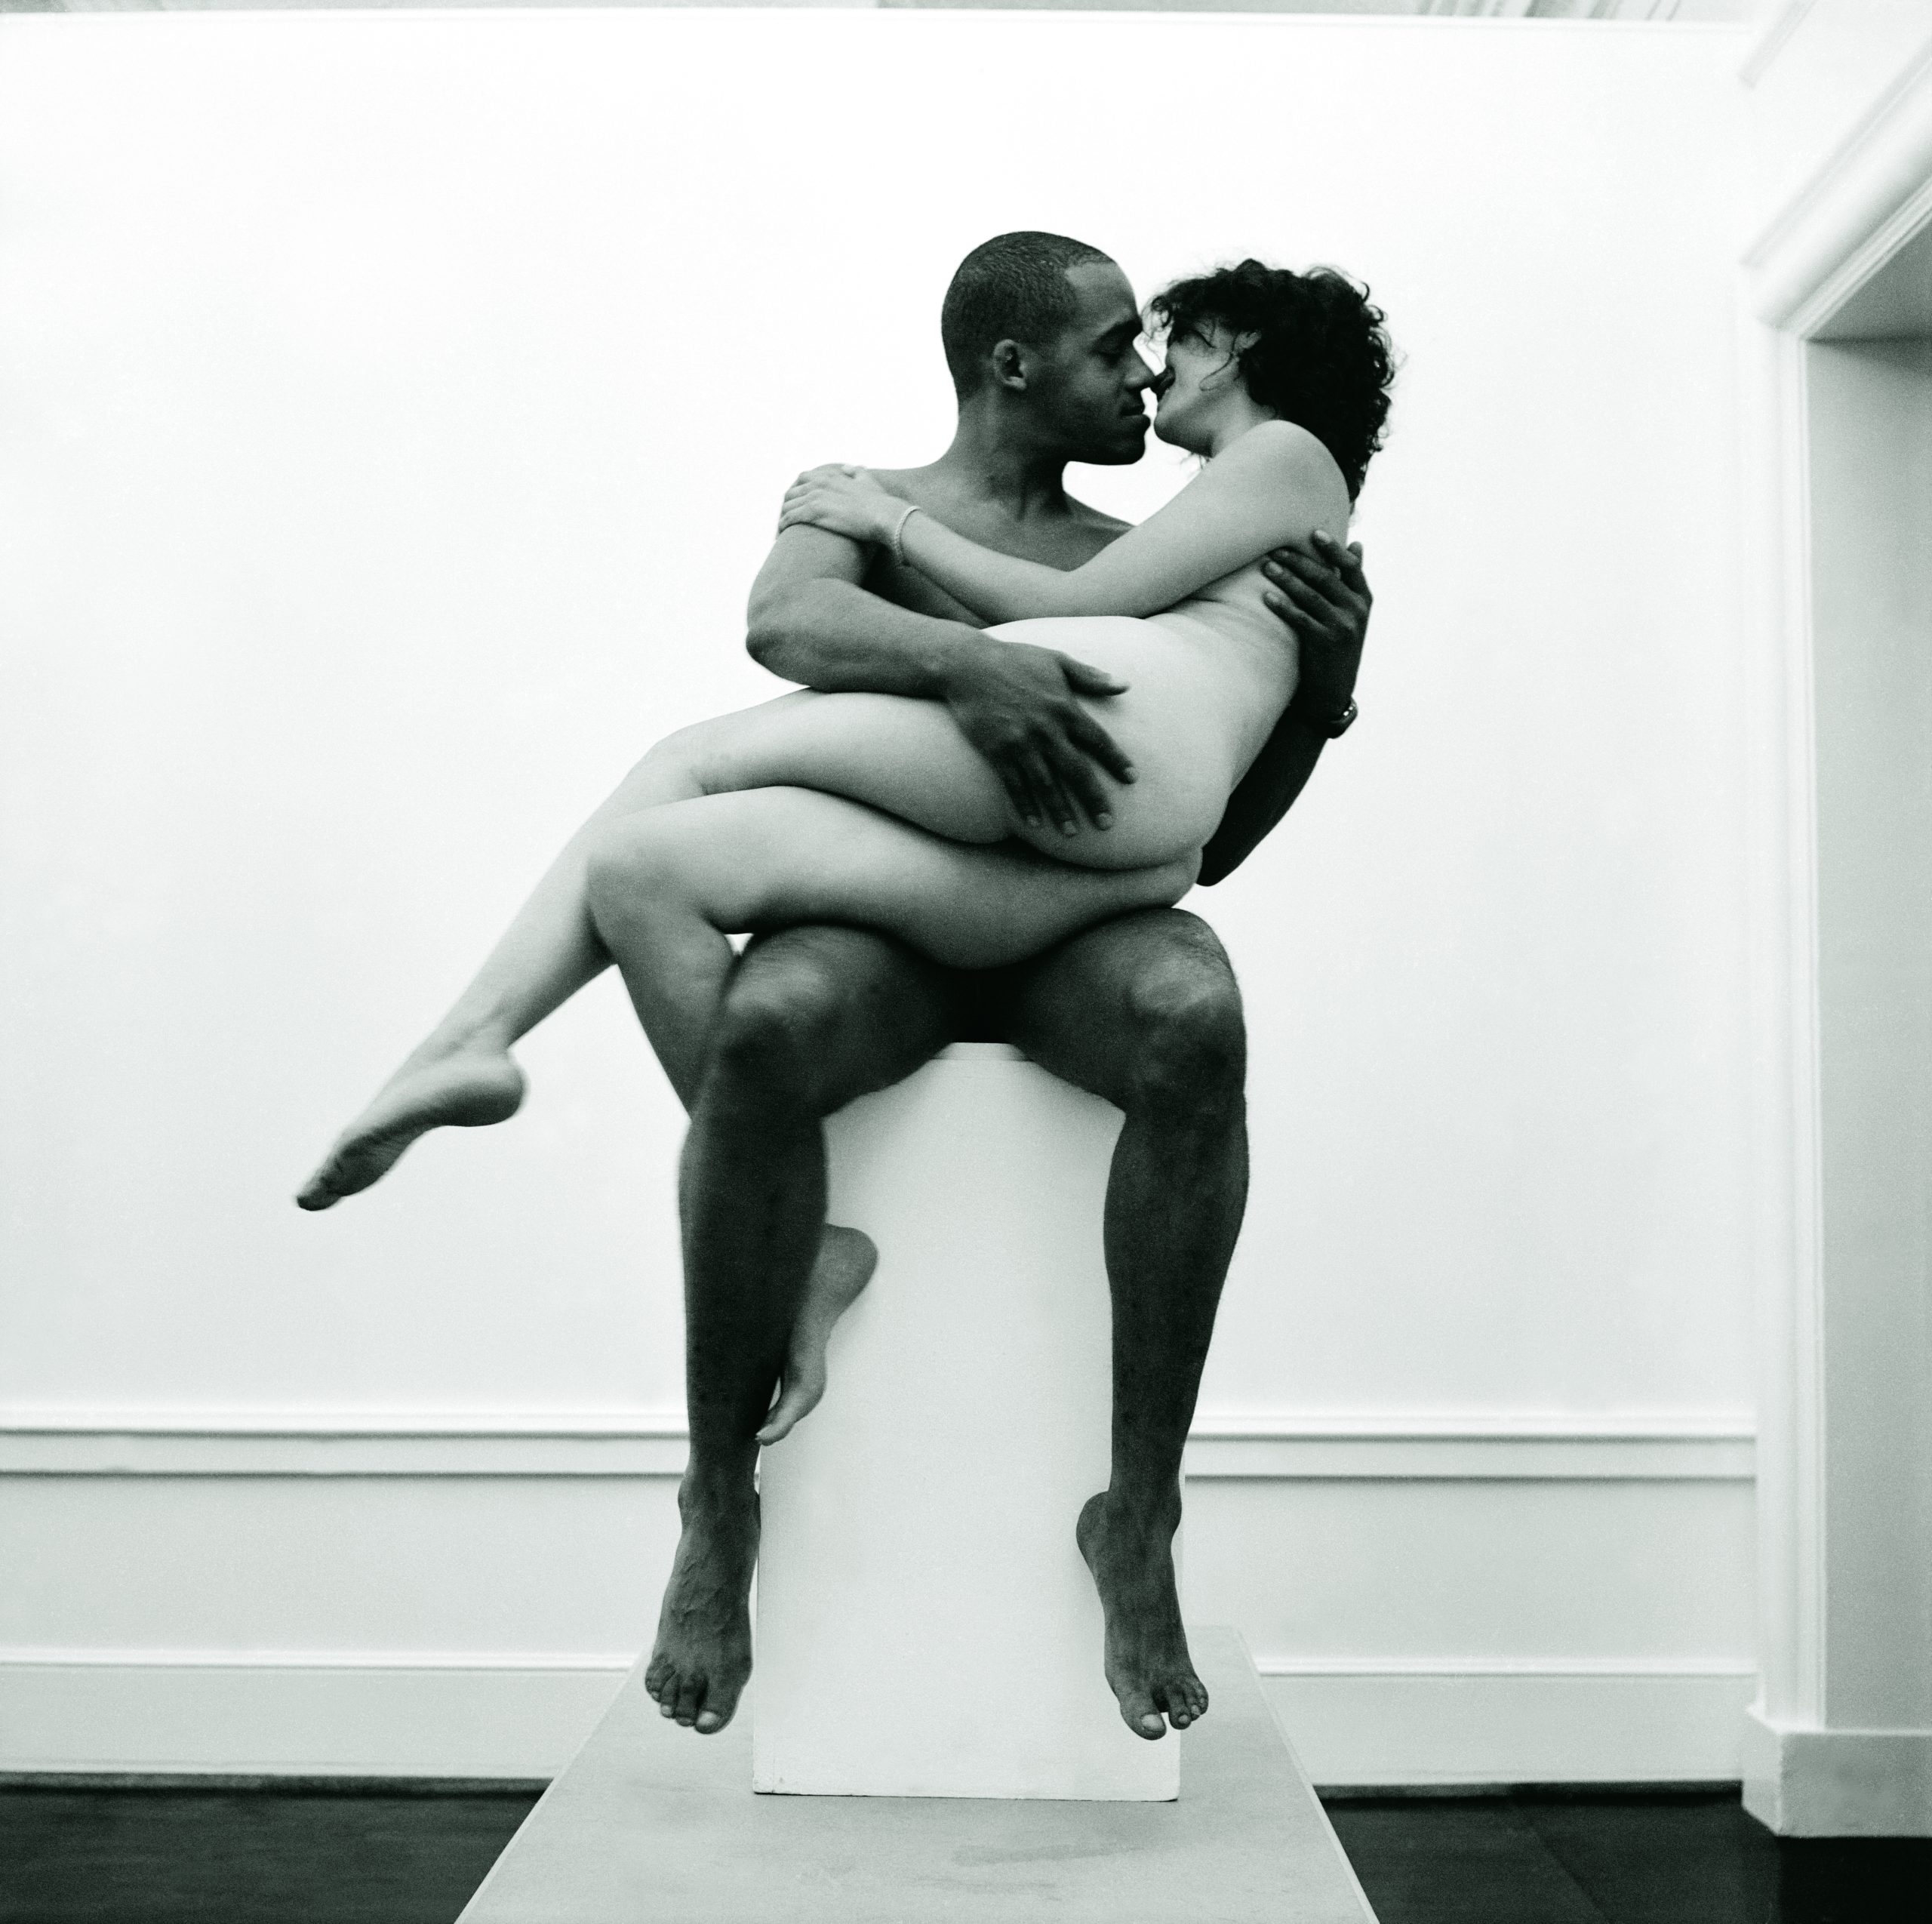 Black and white photograph depicting a light-skinned nude woman sitting on the lap of a nude brown man on a pedestal inside a gallery-like setting, reminiscent of a classical sculpture.